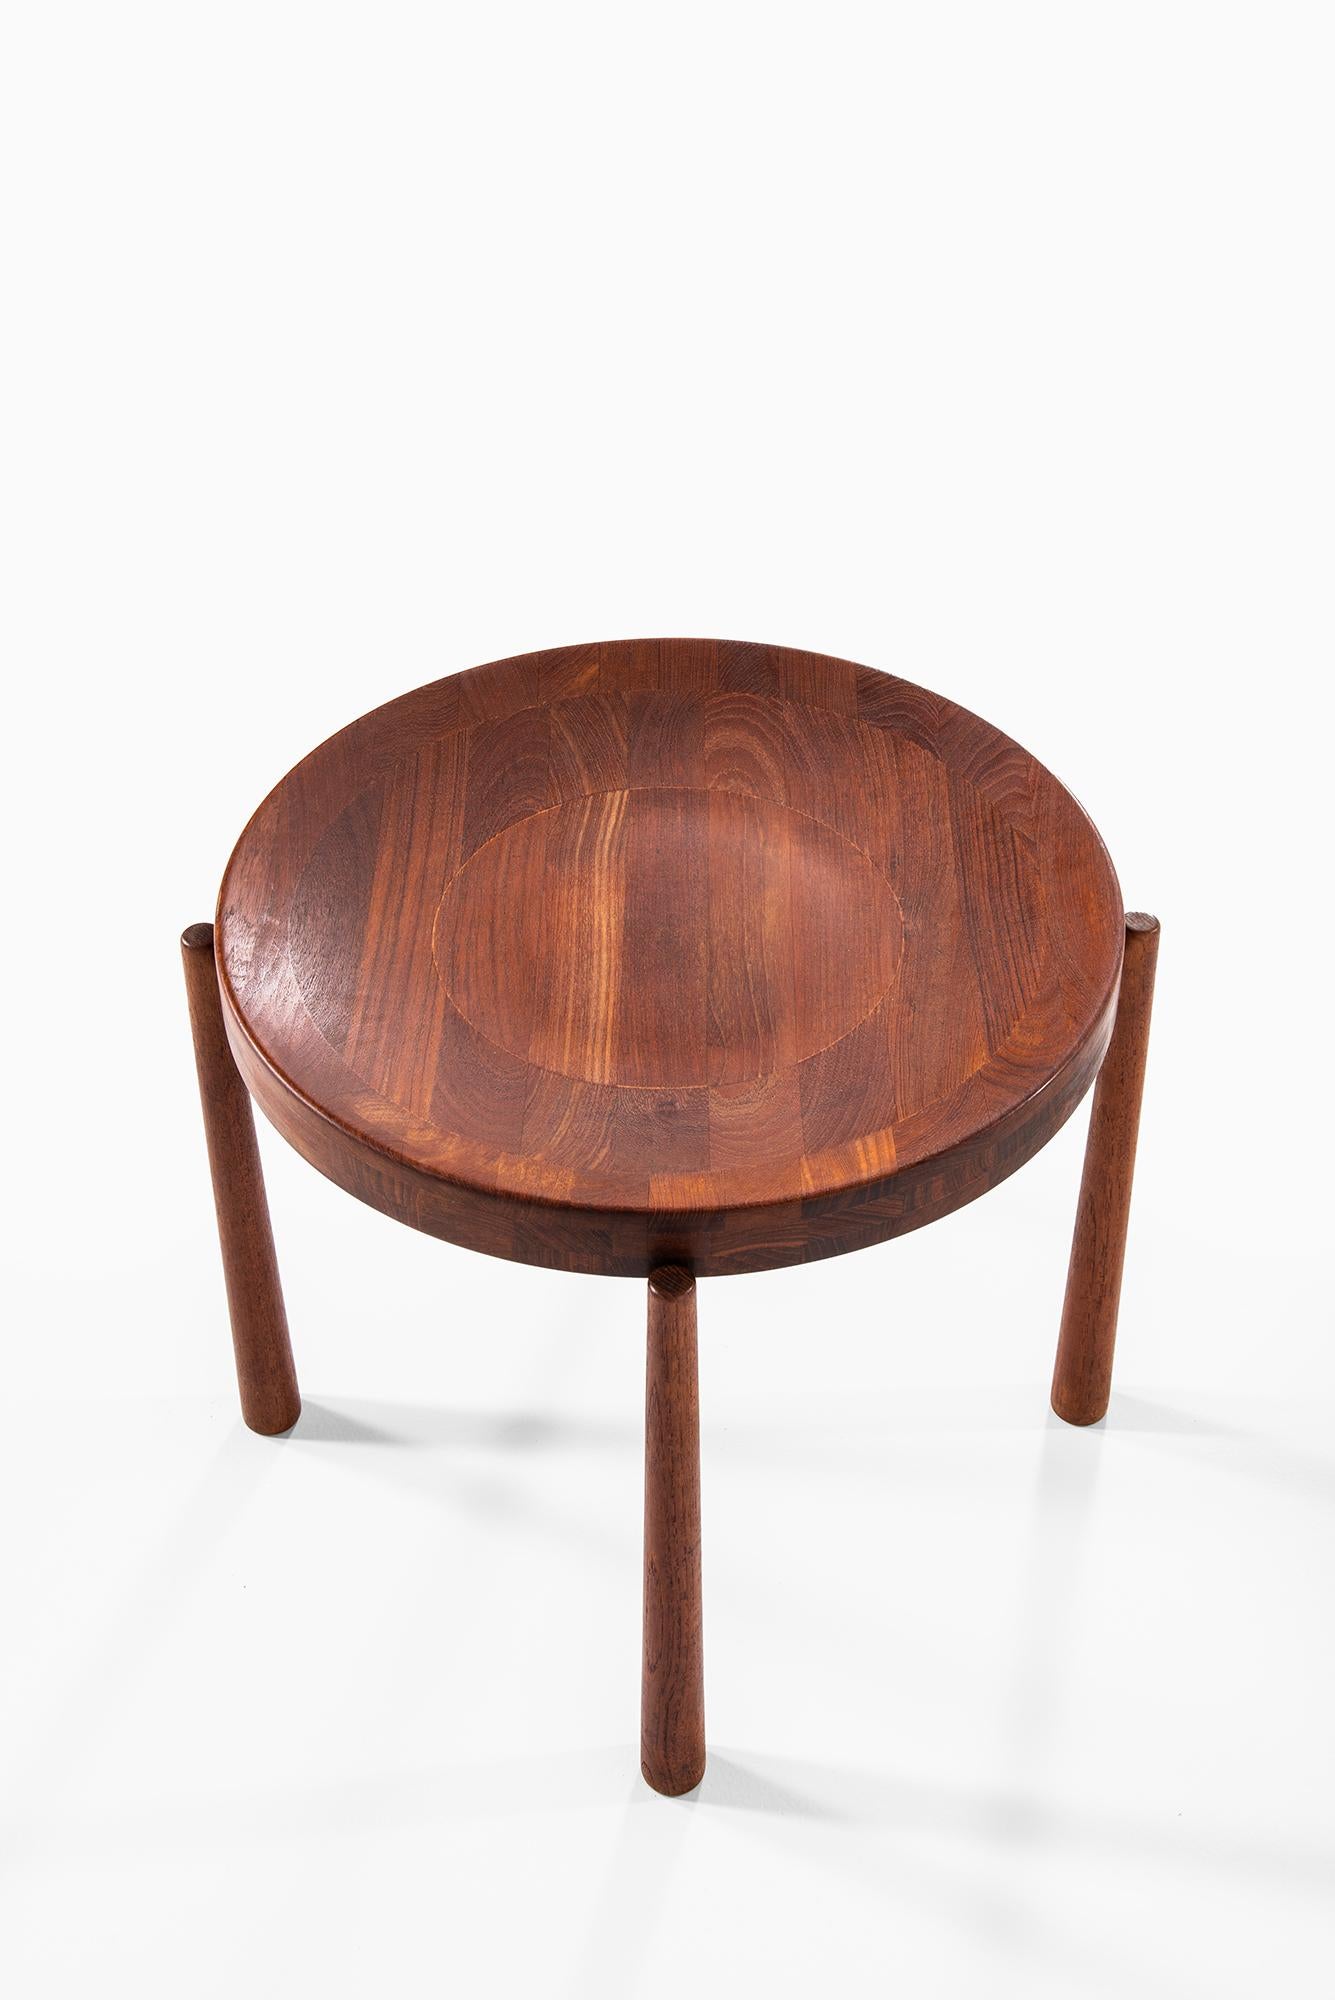 Mid-20th Century Jens Harald Quistgaard Side Table by Nissen in Denmark